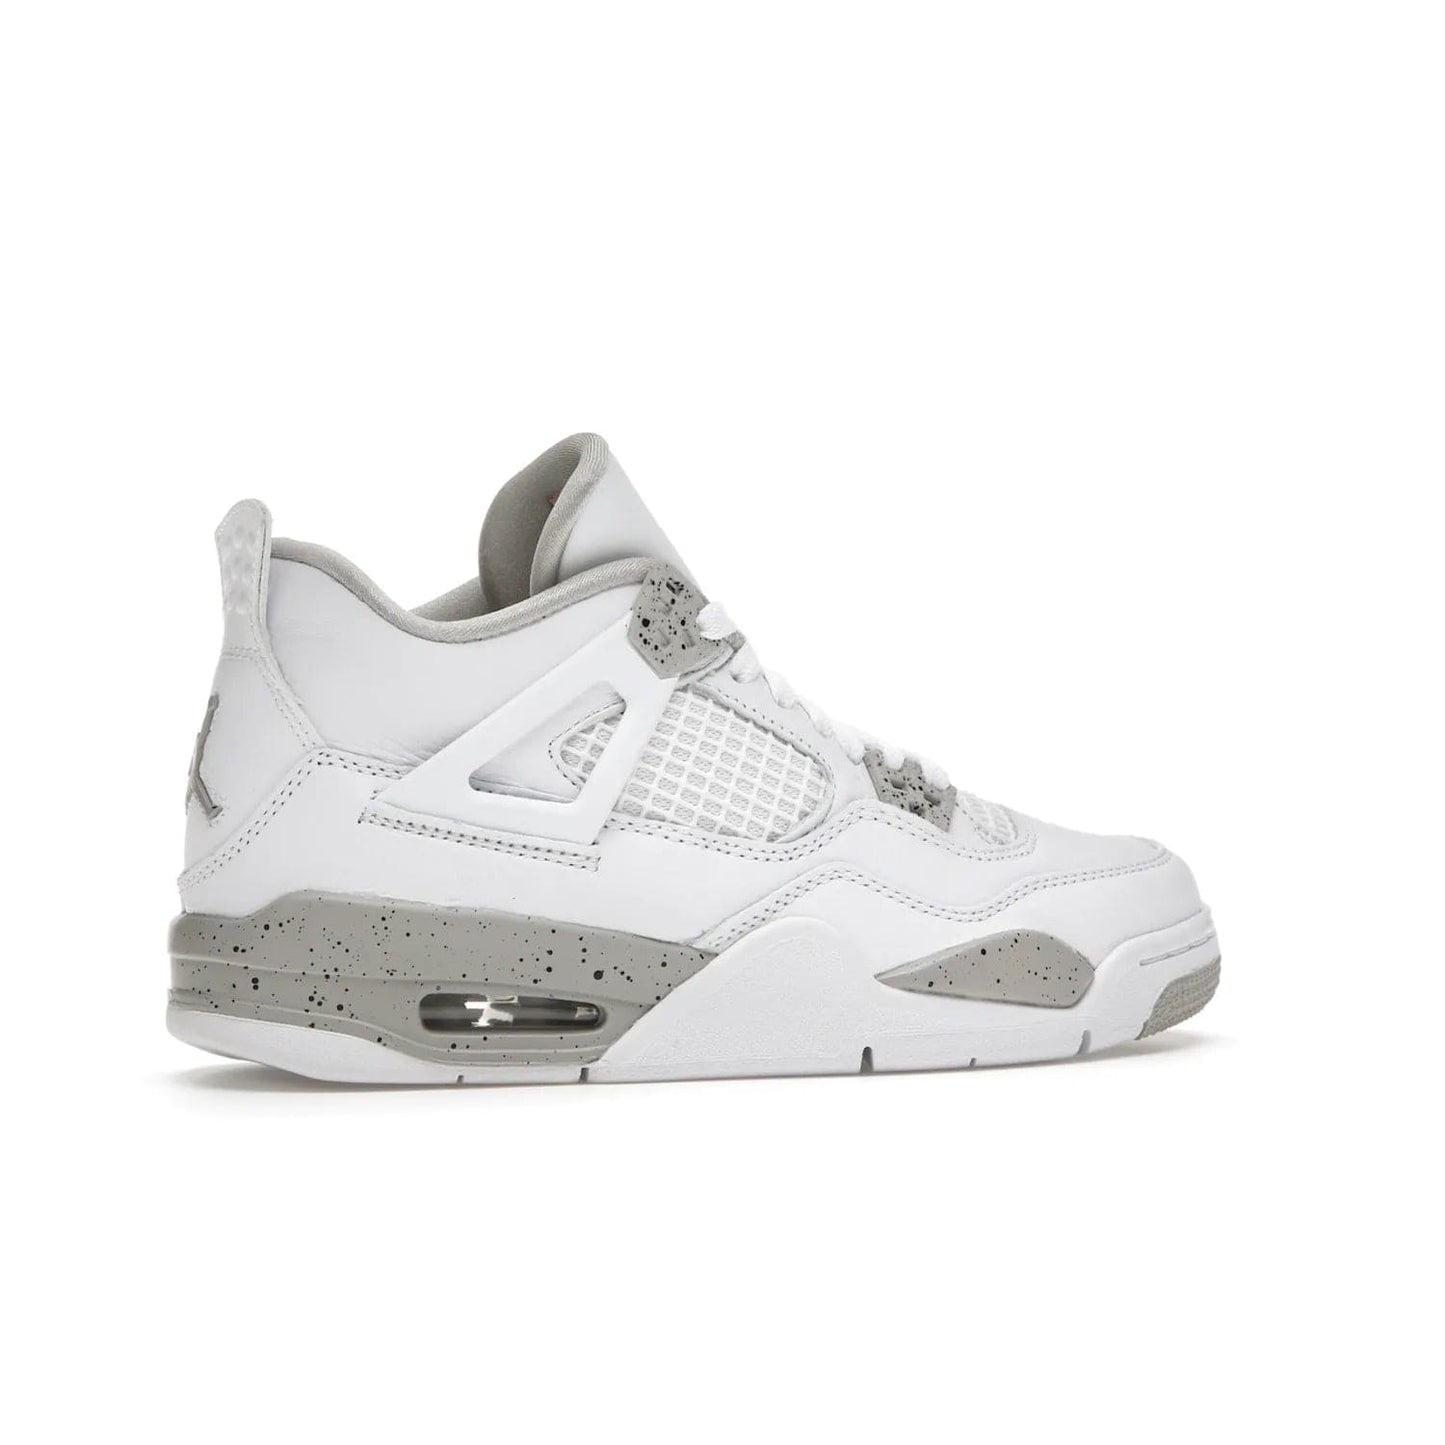 Jordan 4 Retro White Oreo (2021) (GS) - Image 35 - Only at www.BallersClubKickz.com - White Oreo Air Jordan 4 Retro 2021 GS - Iconic sneaker silhouette with white canvas upper, Tech Grey detailing, and Fire Red accents. Available July 2021.